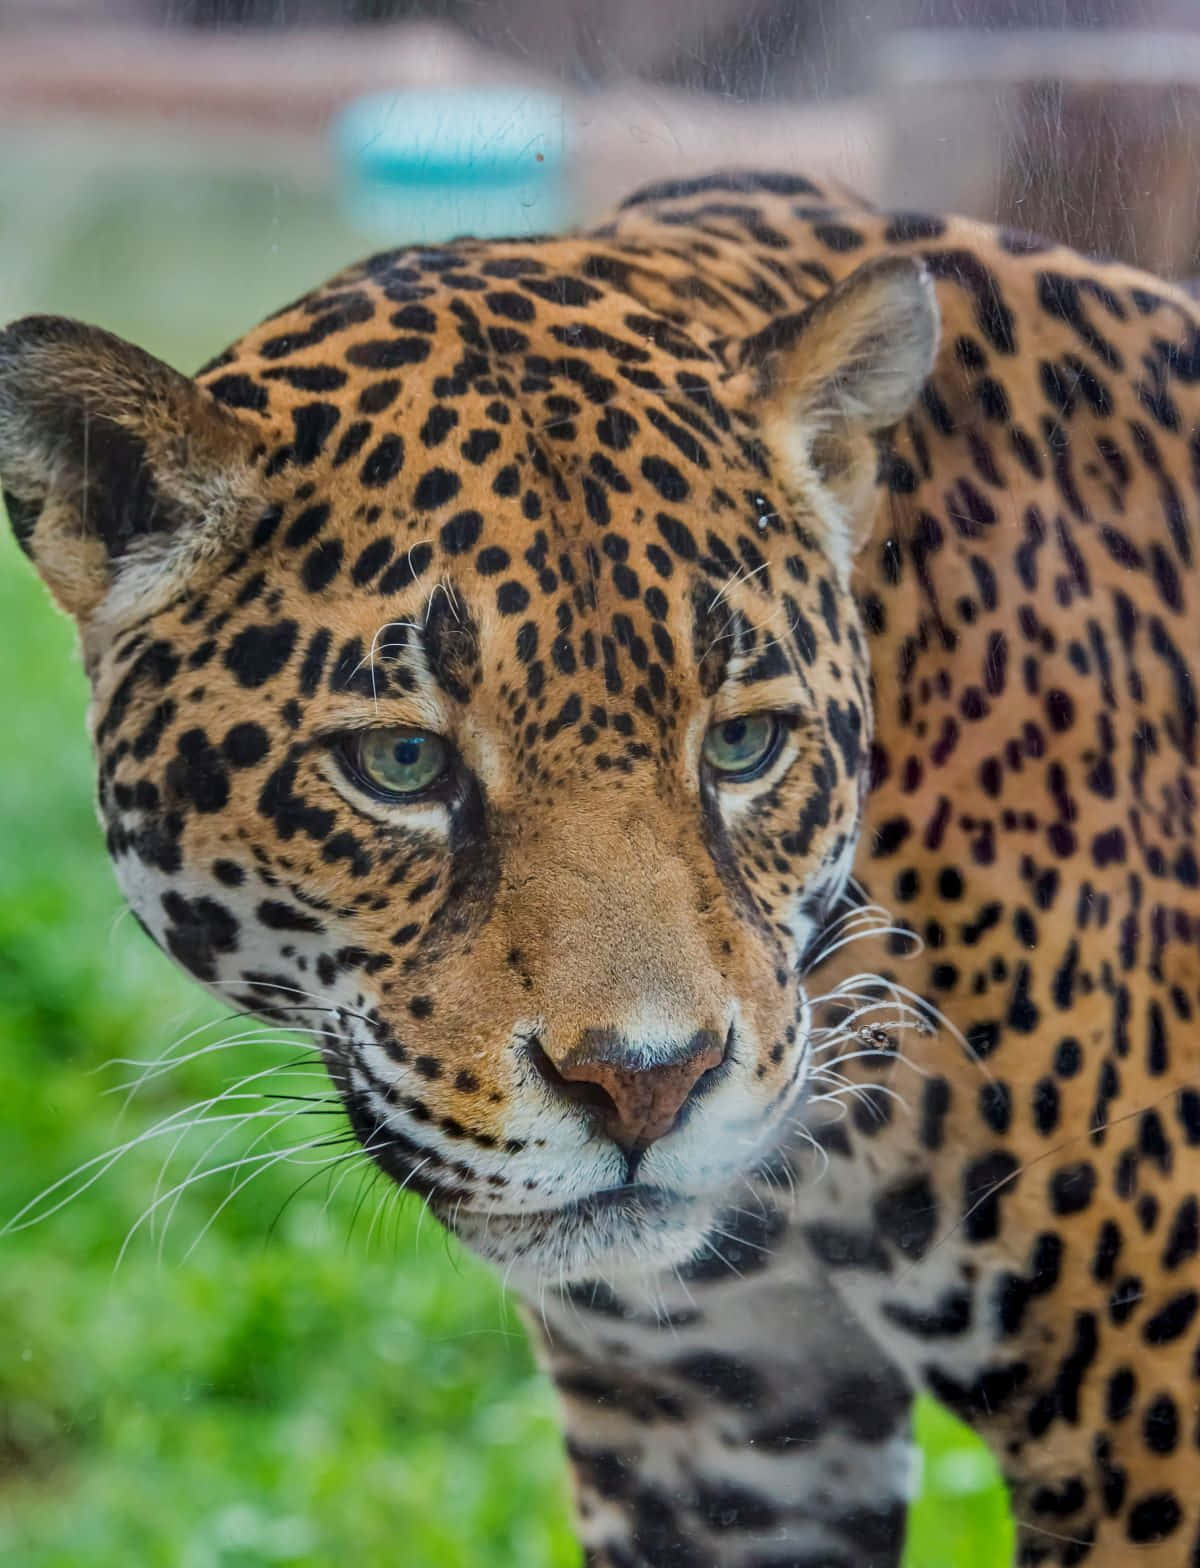 A Jaguar Is Looking Out Of A Glass Enclosure